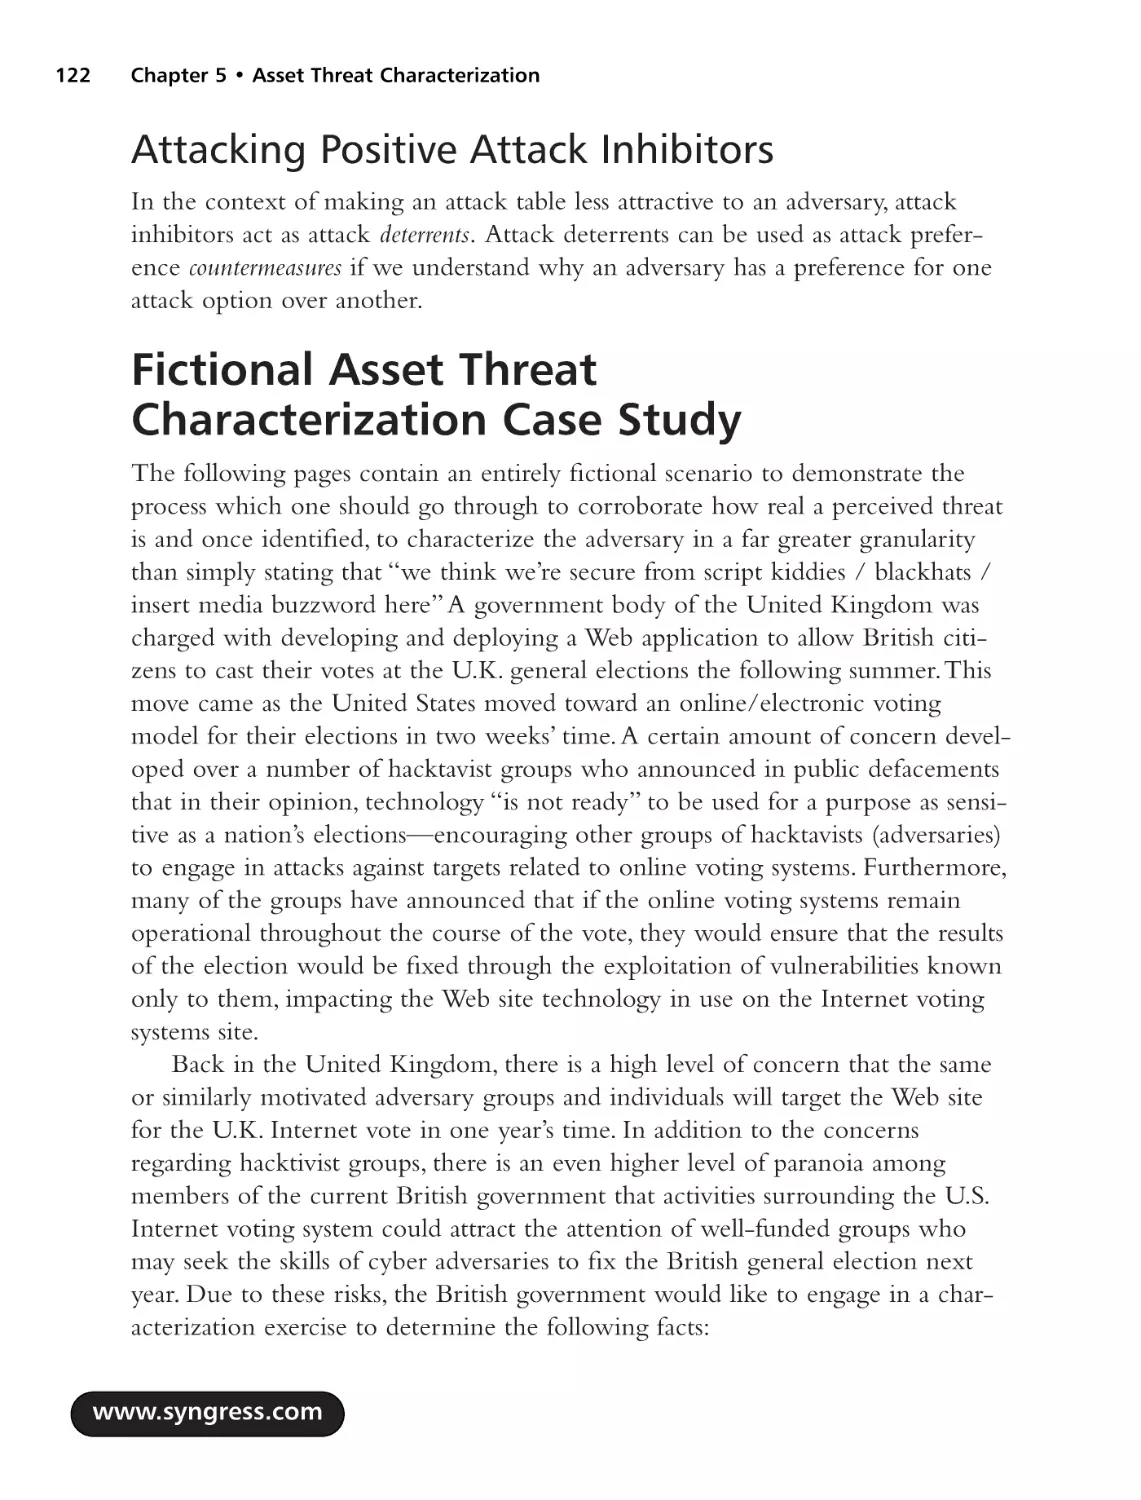 Attacking Positive Attack Inhibitors
Fictional Asset Threat Characterization Case Study